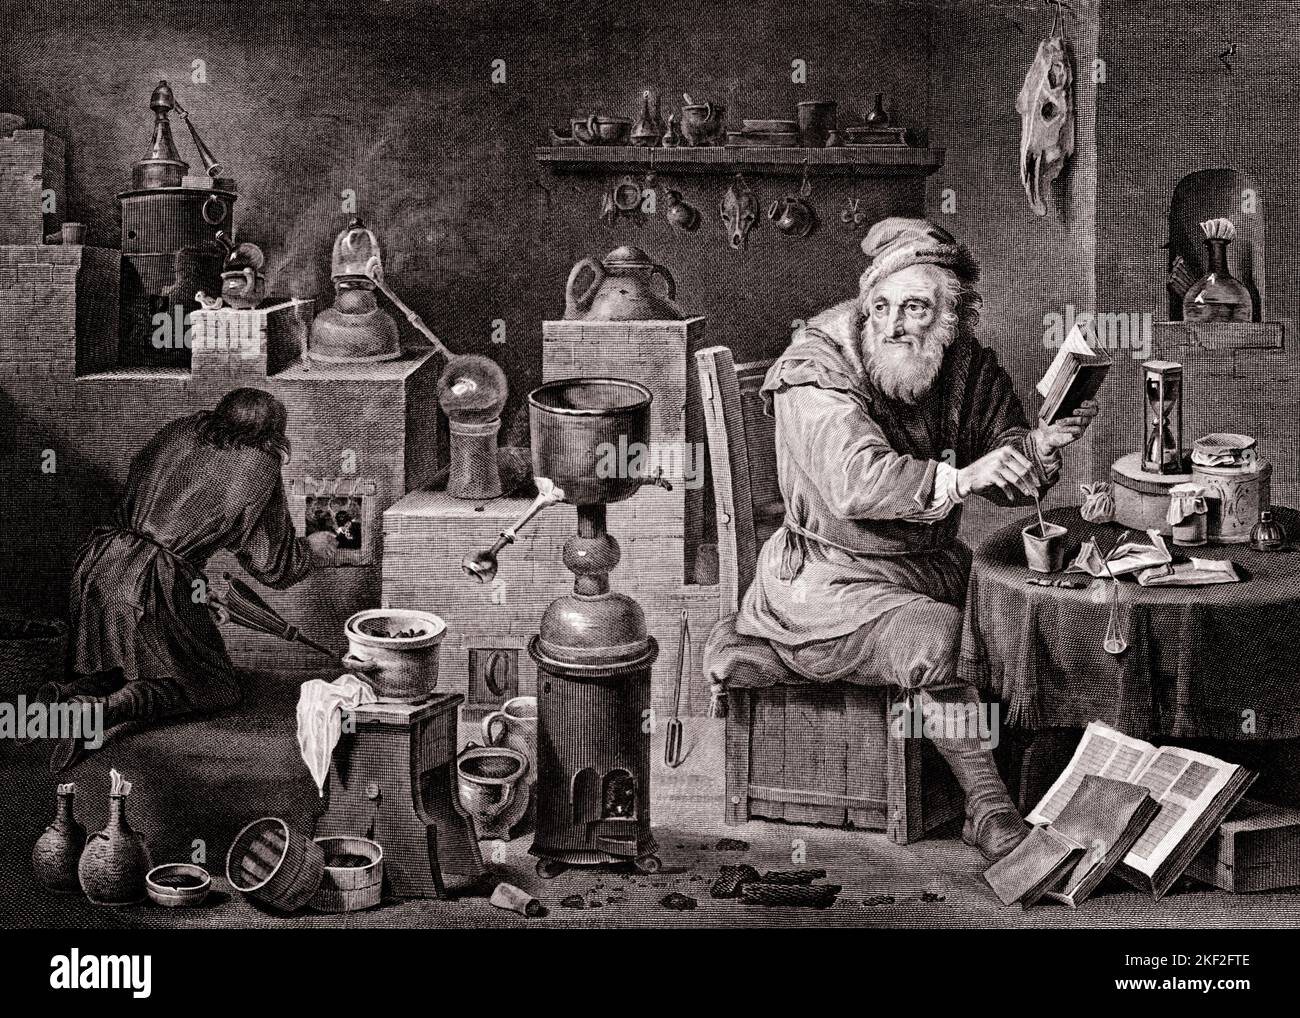 1640s THE ALCHEMIST LABORATORY OF THE MIDDLE AGES ATTEMPTS TO TURN BASED METALS INTO GOLD FROM PAINTING BY DAVID TENIERS 1649 - q67044 CPC001 HARS DISCOVERY SCIENTIFIC DAVID INTO THE FACIAL HAIR OCCUPATIONS IMAGINATION 1640s ARTWORK ATTEMPTS BASED BEARDS METALS BLACK AND WHITE LABORATORIES LABS OLD FASHIONED Stock Photo